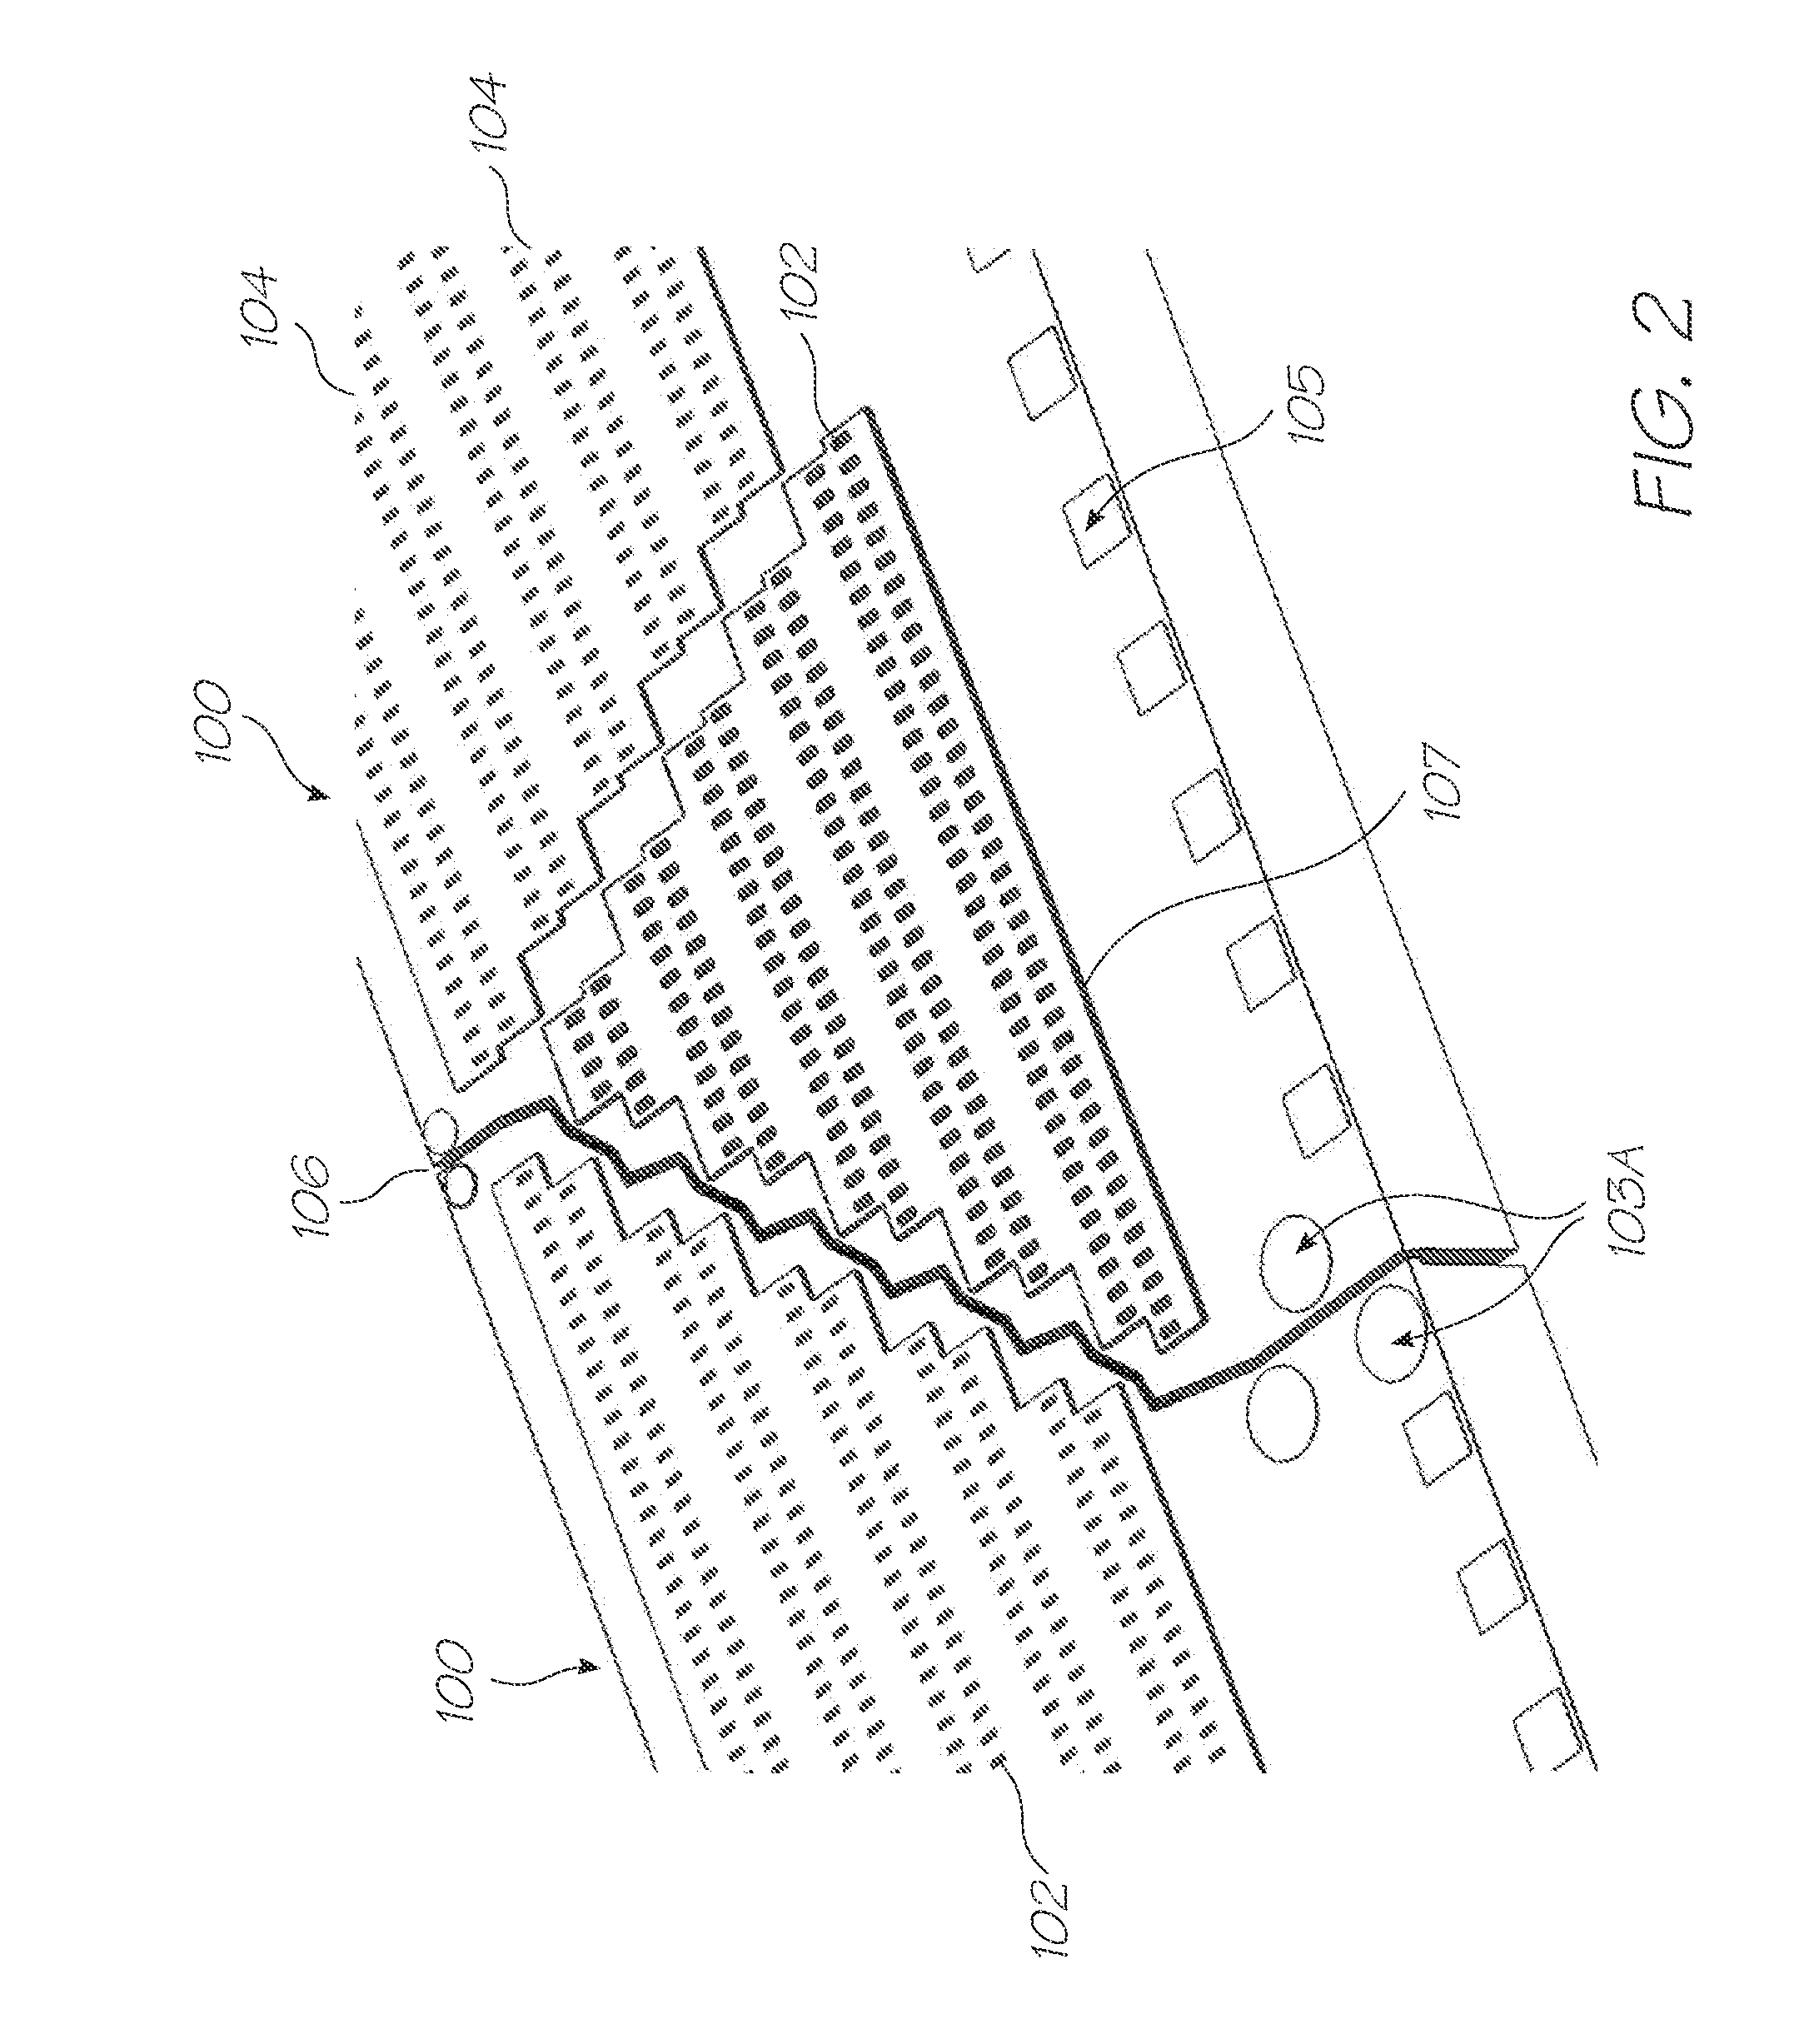 Method of providing printhead assembly having complementary hydrophilic and hydrophobic surfaces